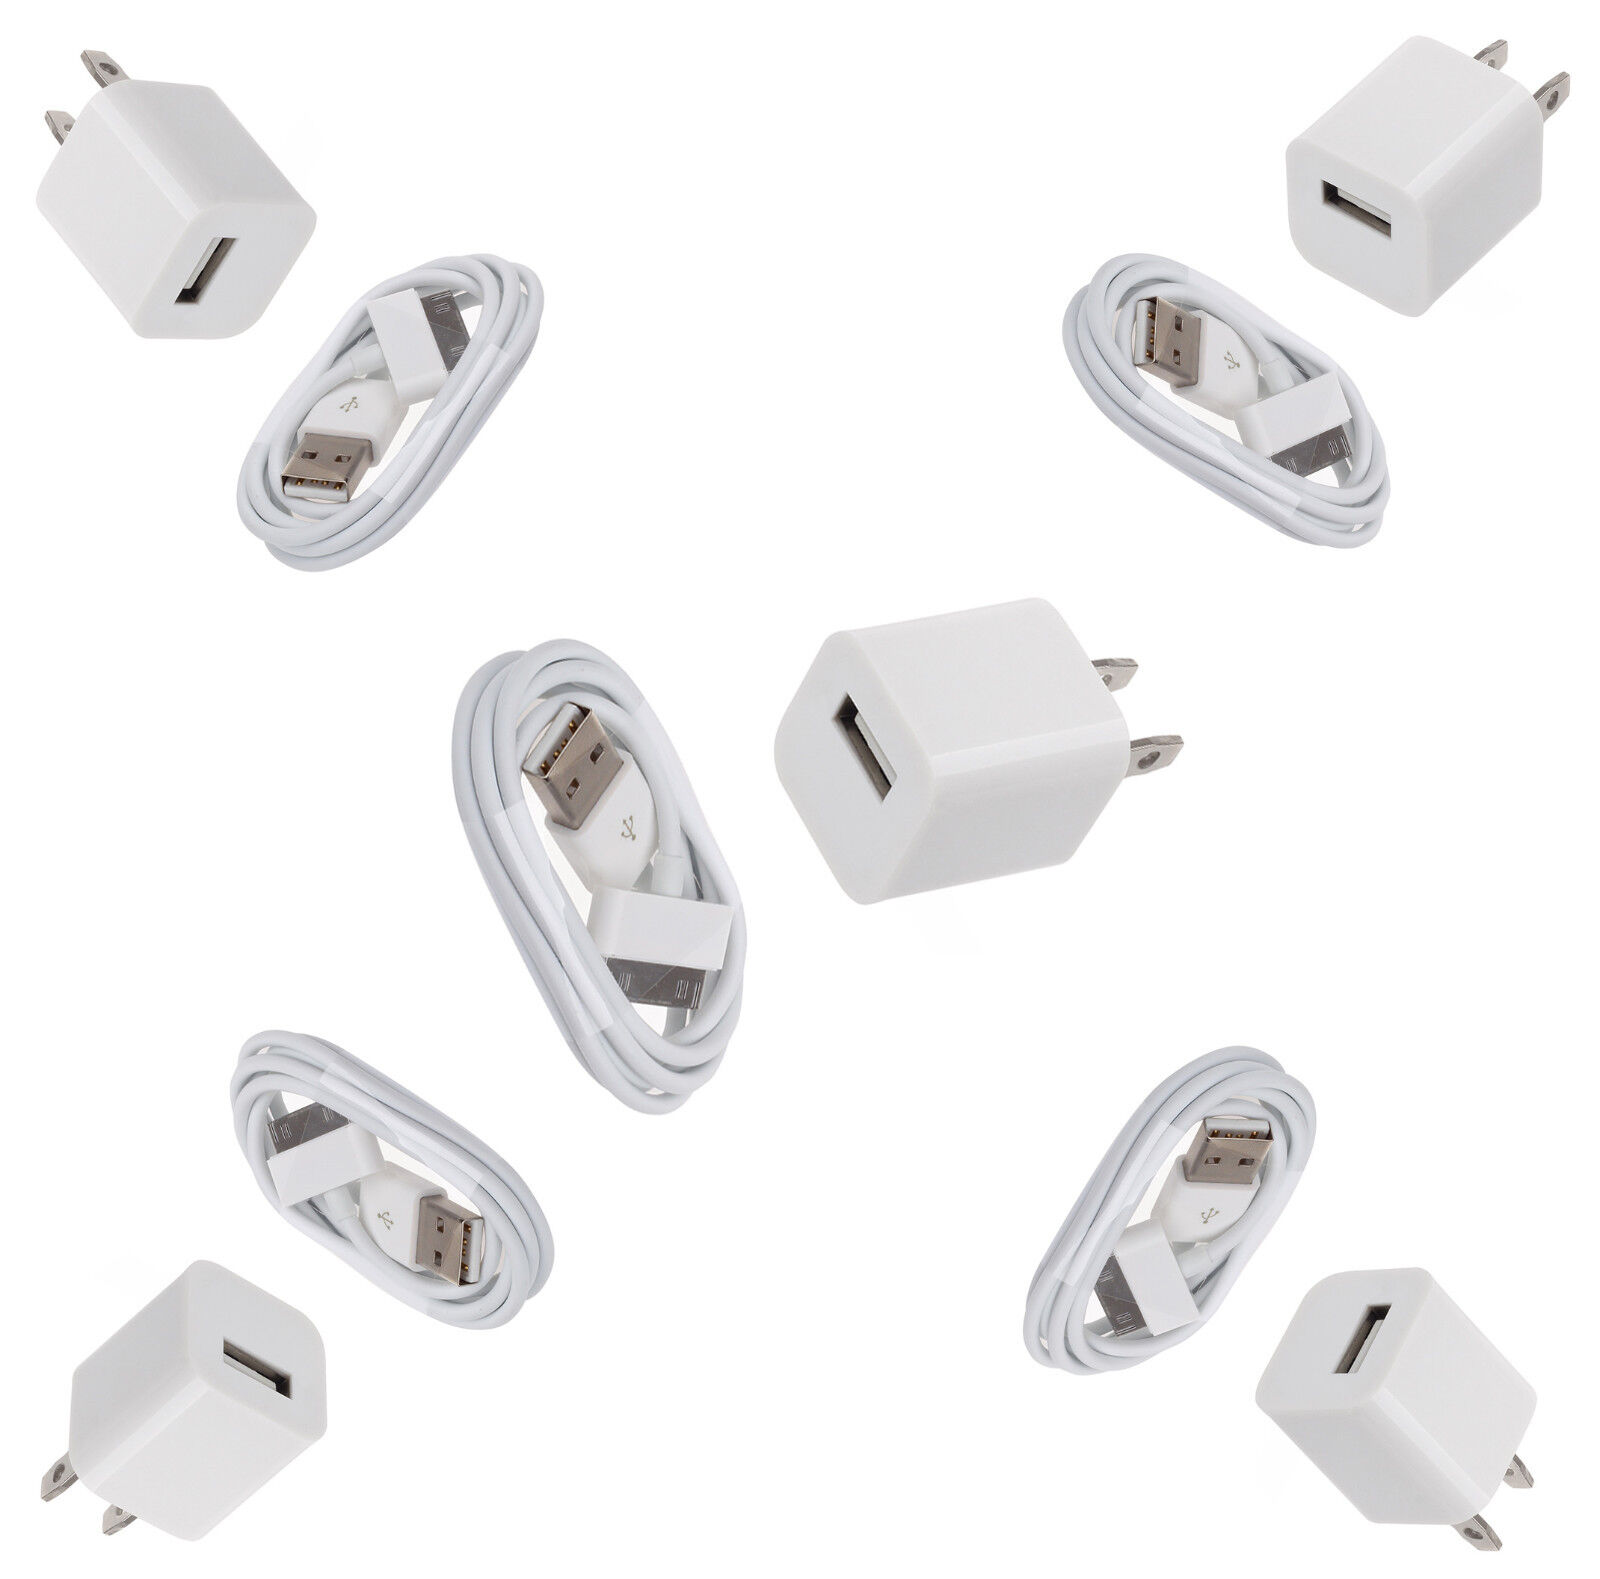 5X USB USA AC Power Adapter Wall Charger Plug + SYNC Cable iPod iPhone 3GS 4 4S